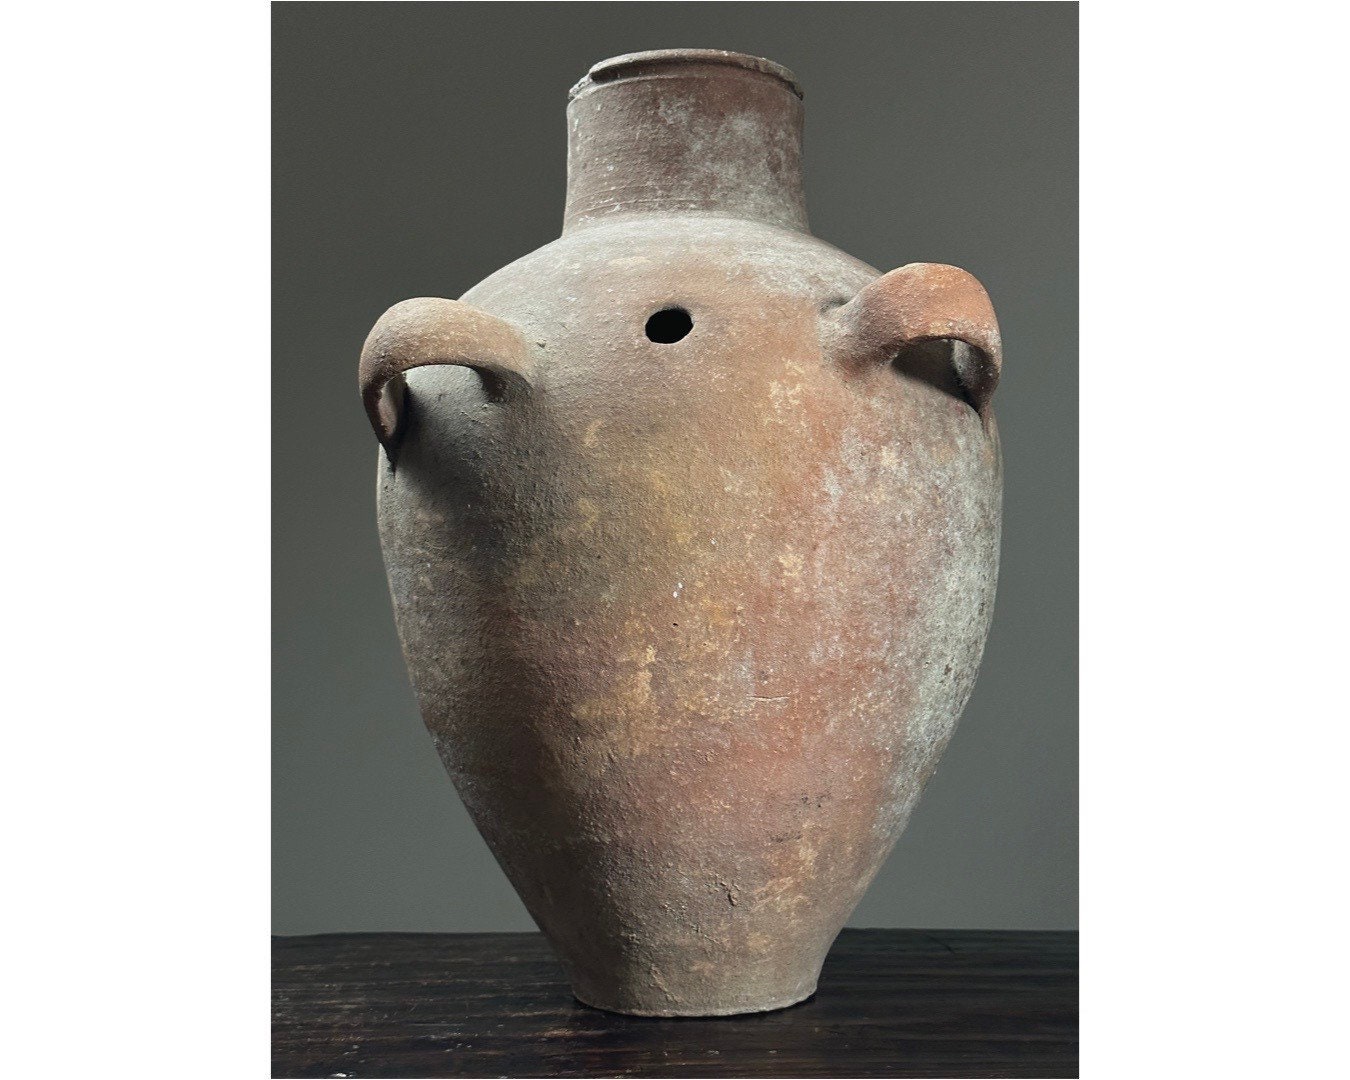 Greek Terracotta Pottery - Patitiri Pot with Handles - Eye of the Day